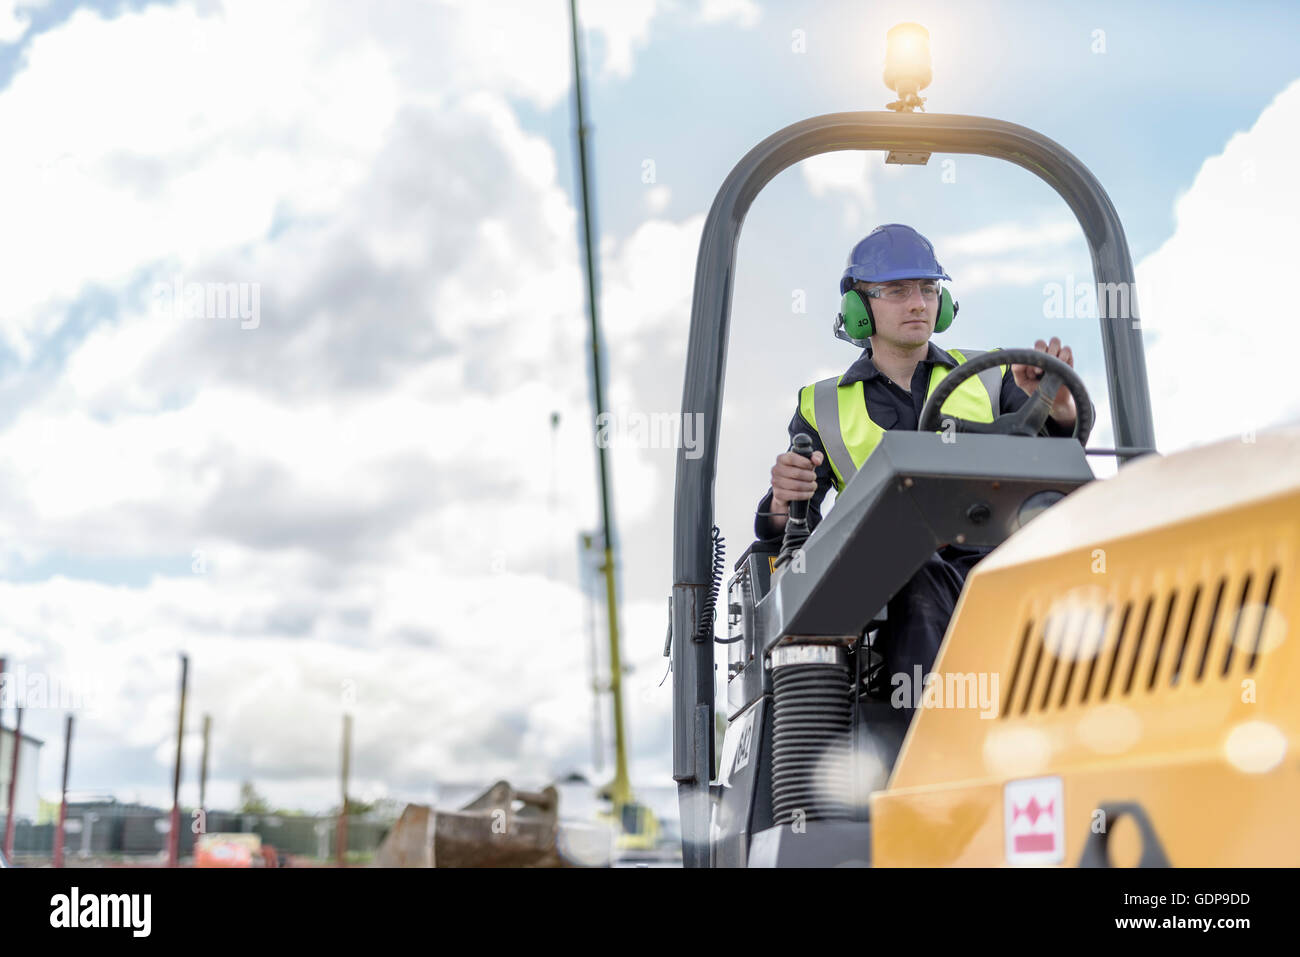 Apprentice builders training with road roller on building site Stock Photo